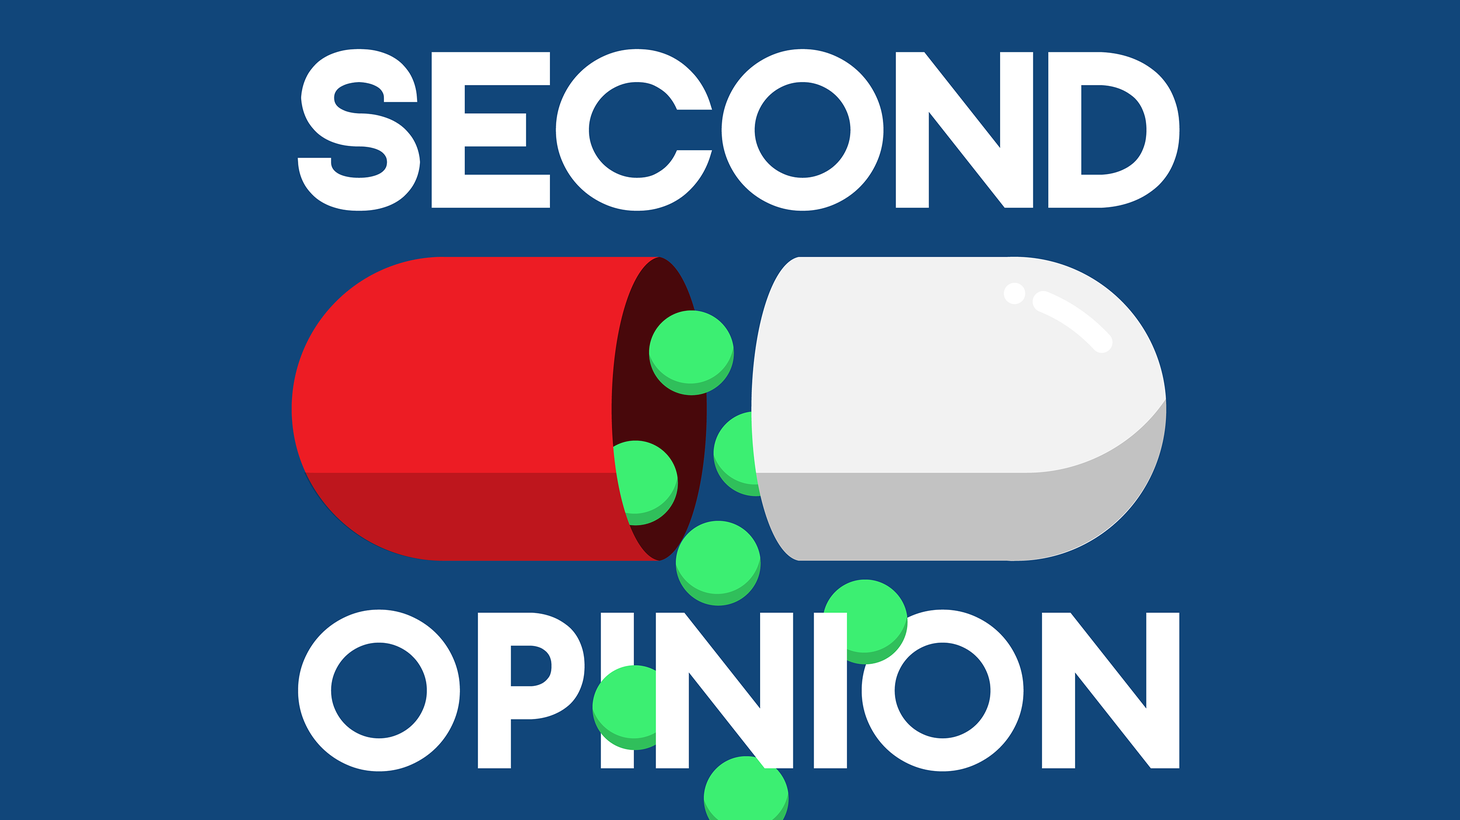 If you are prescribed a drug, how do you find out how effective the drug really is?